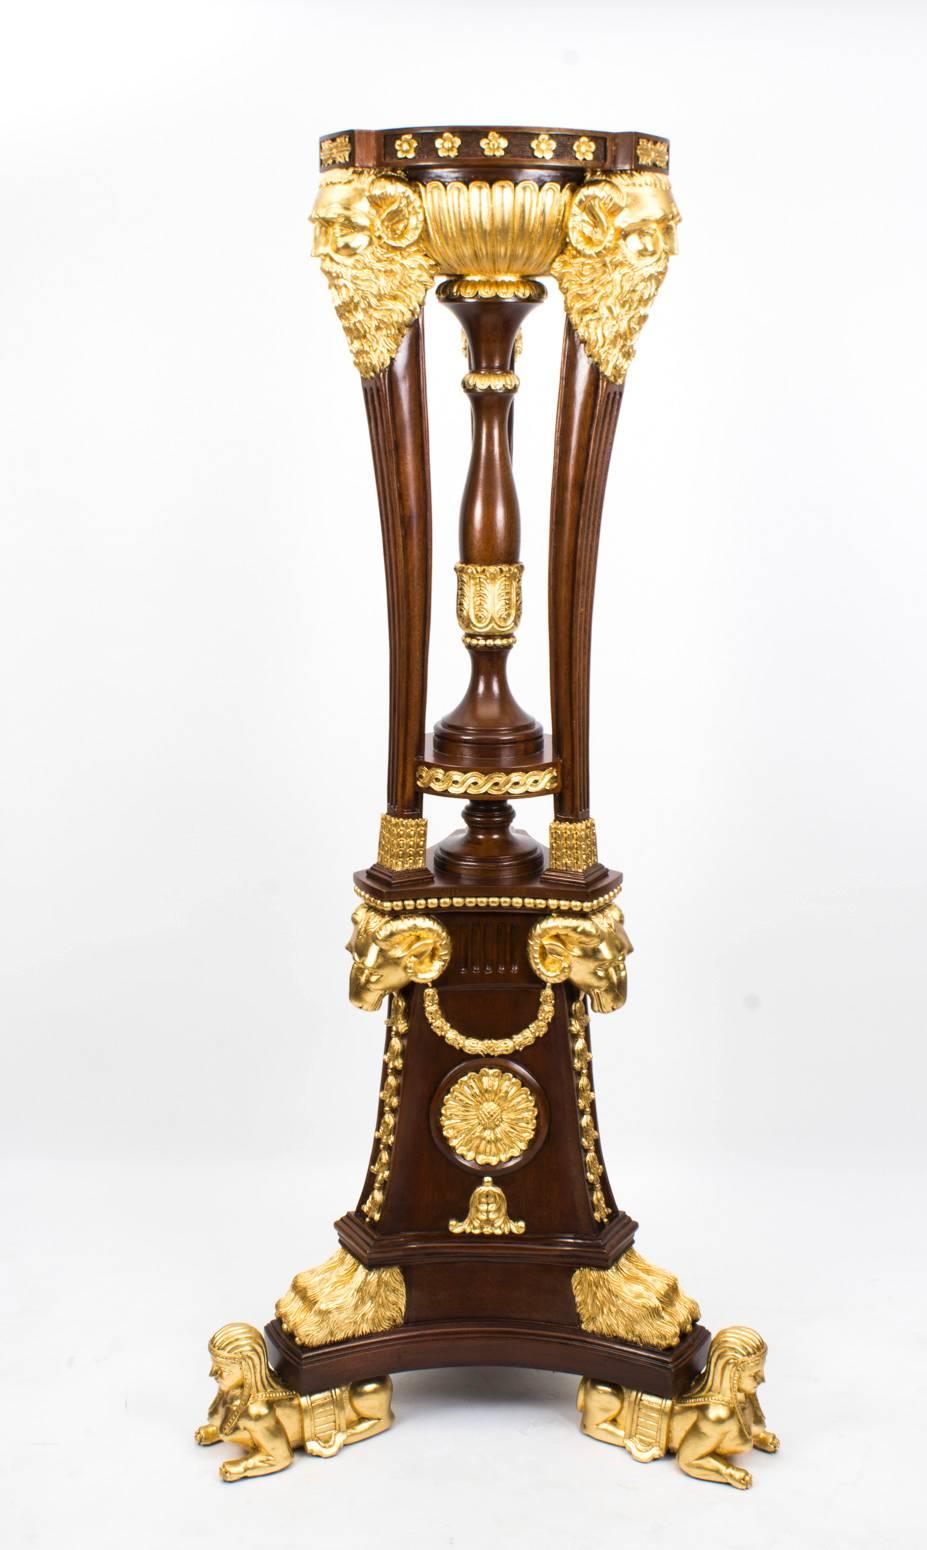 This extraordinary monumental pair of mahogany and giltwood torcheres of impressive size are in the ornate Empire style and date from the last quarter of the 20th century. 

The torcheres are supported by tall tripod bases on sphinx feet worked